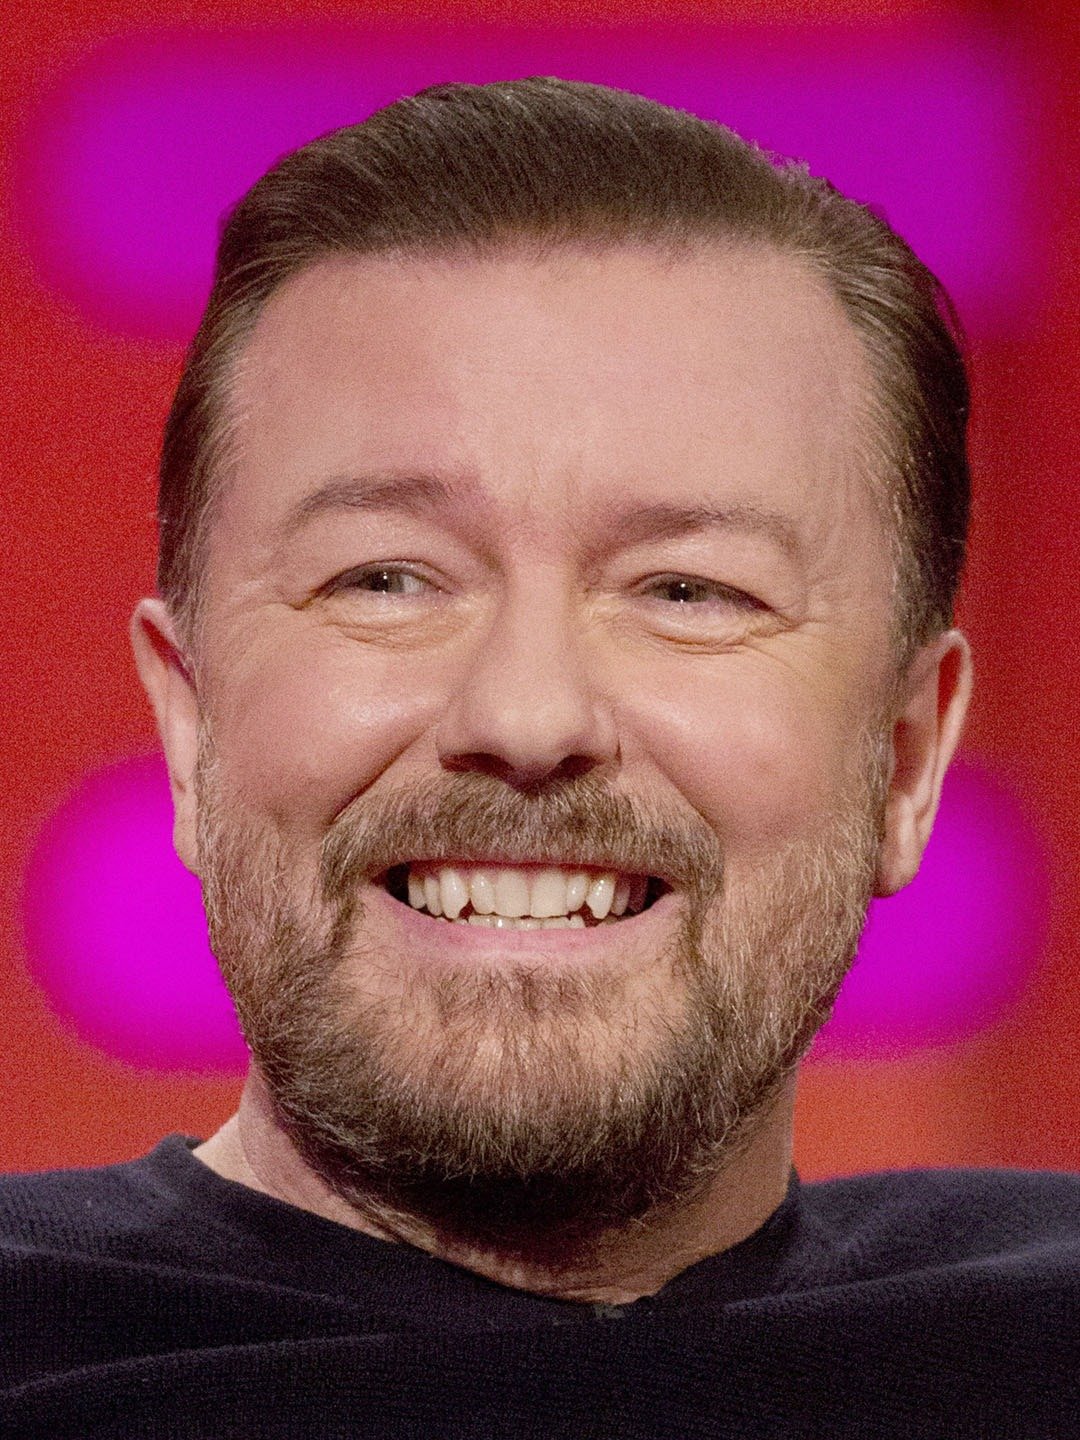 How tall is Ricky Gervais?